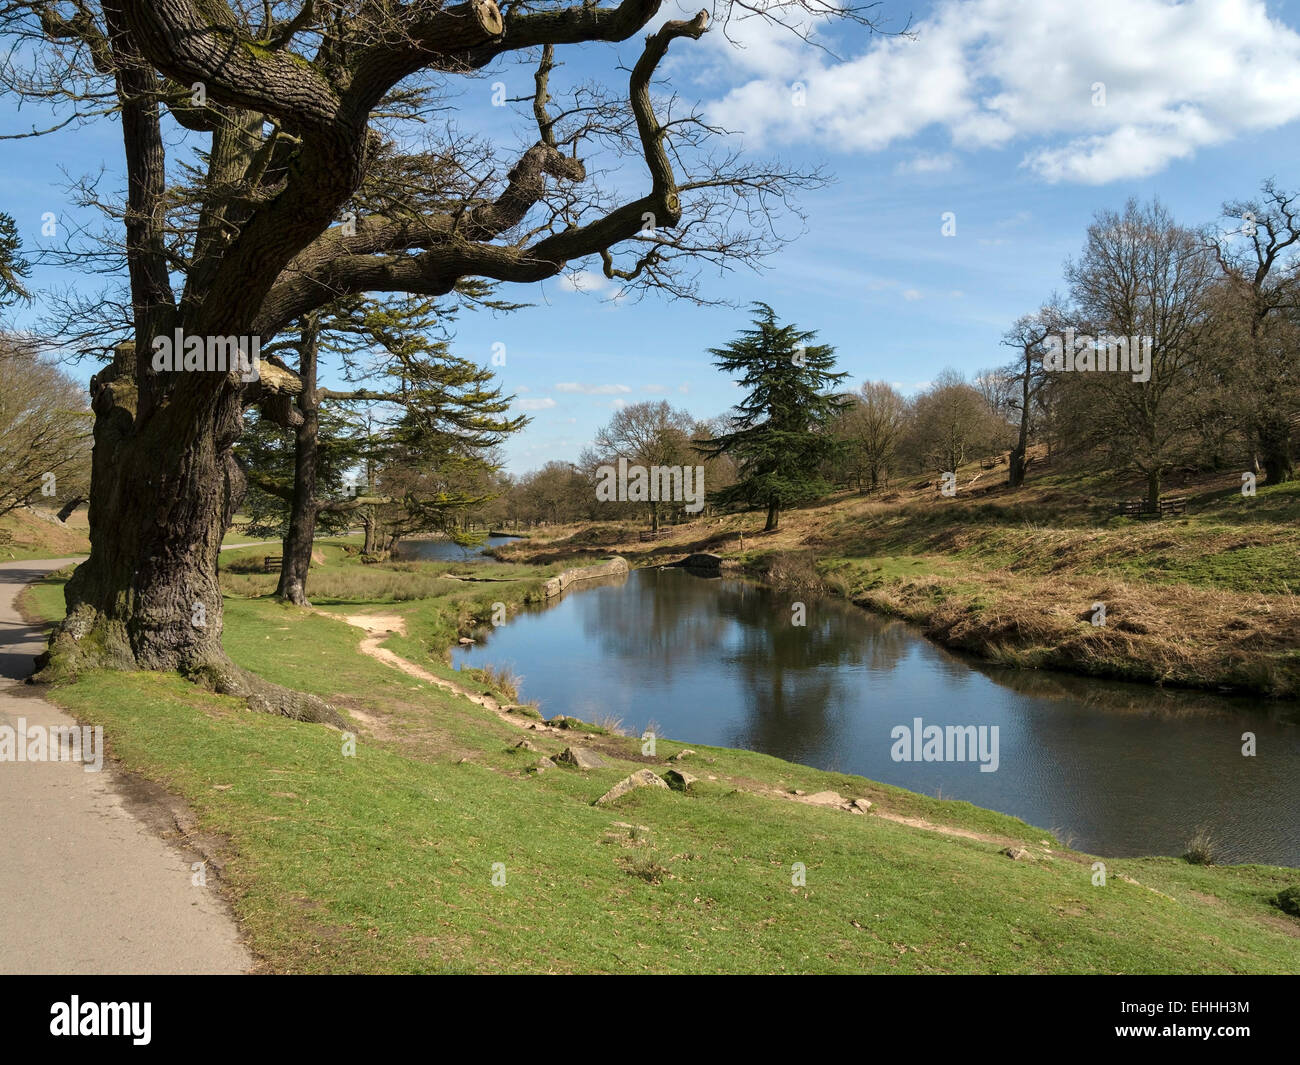 River Lin and trees, Bradgate Park, Charnwood, Leicestershire, England, UK Stock Photo